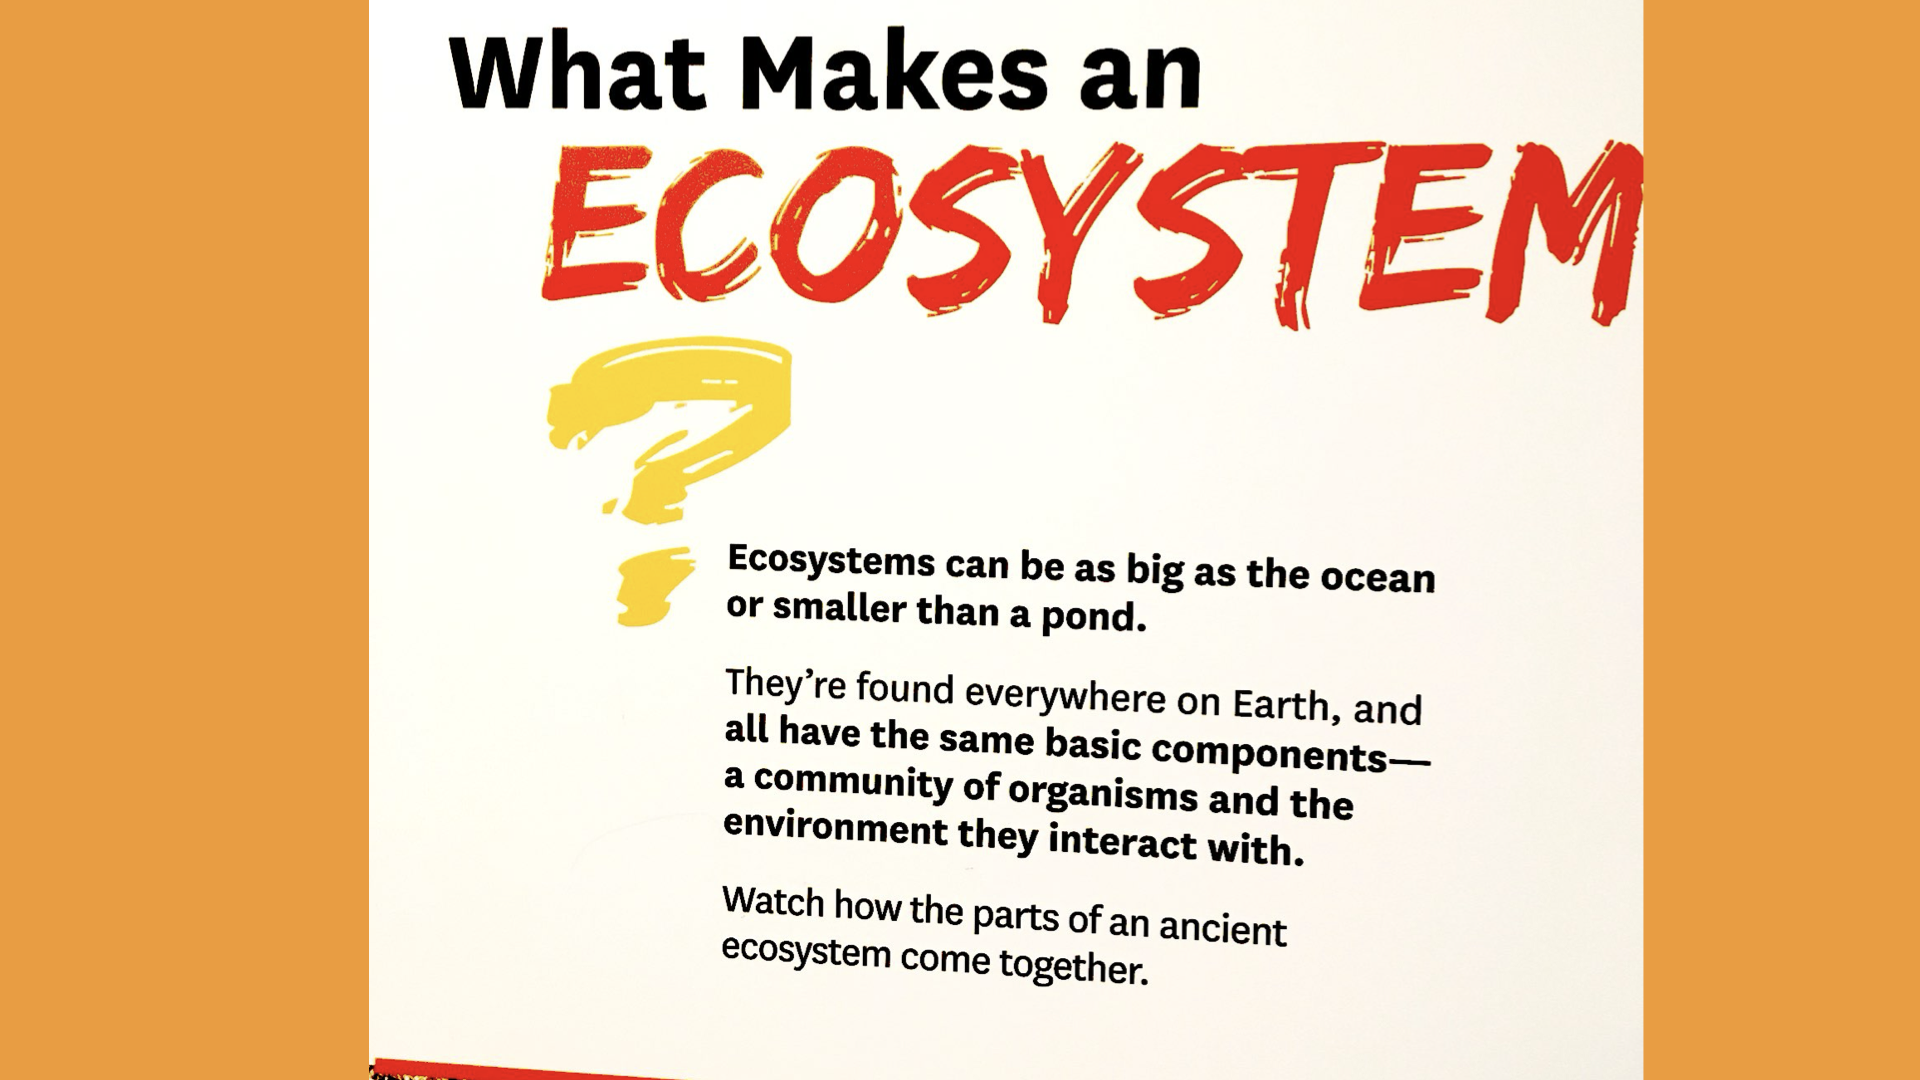 Museum sign asking "What makes an ecosystem?"